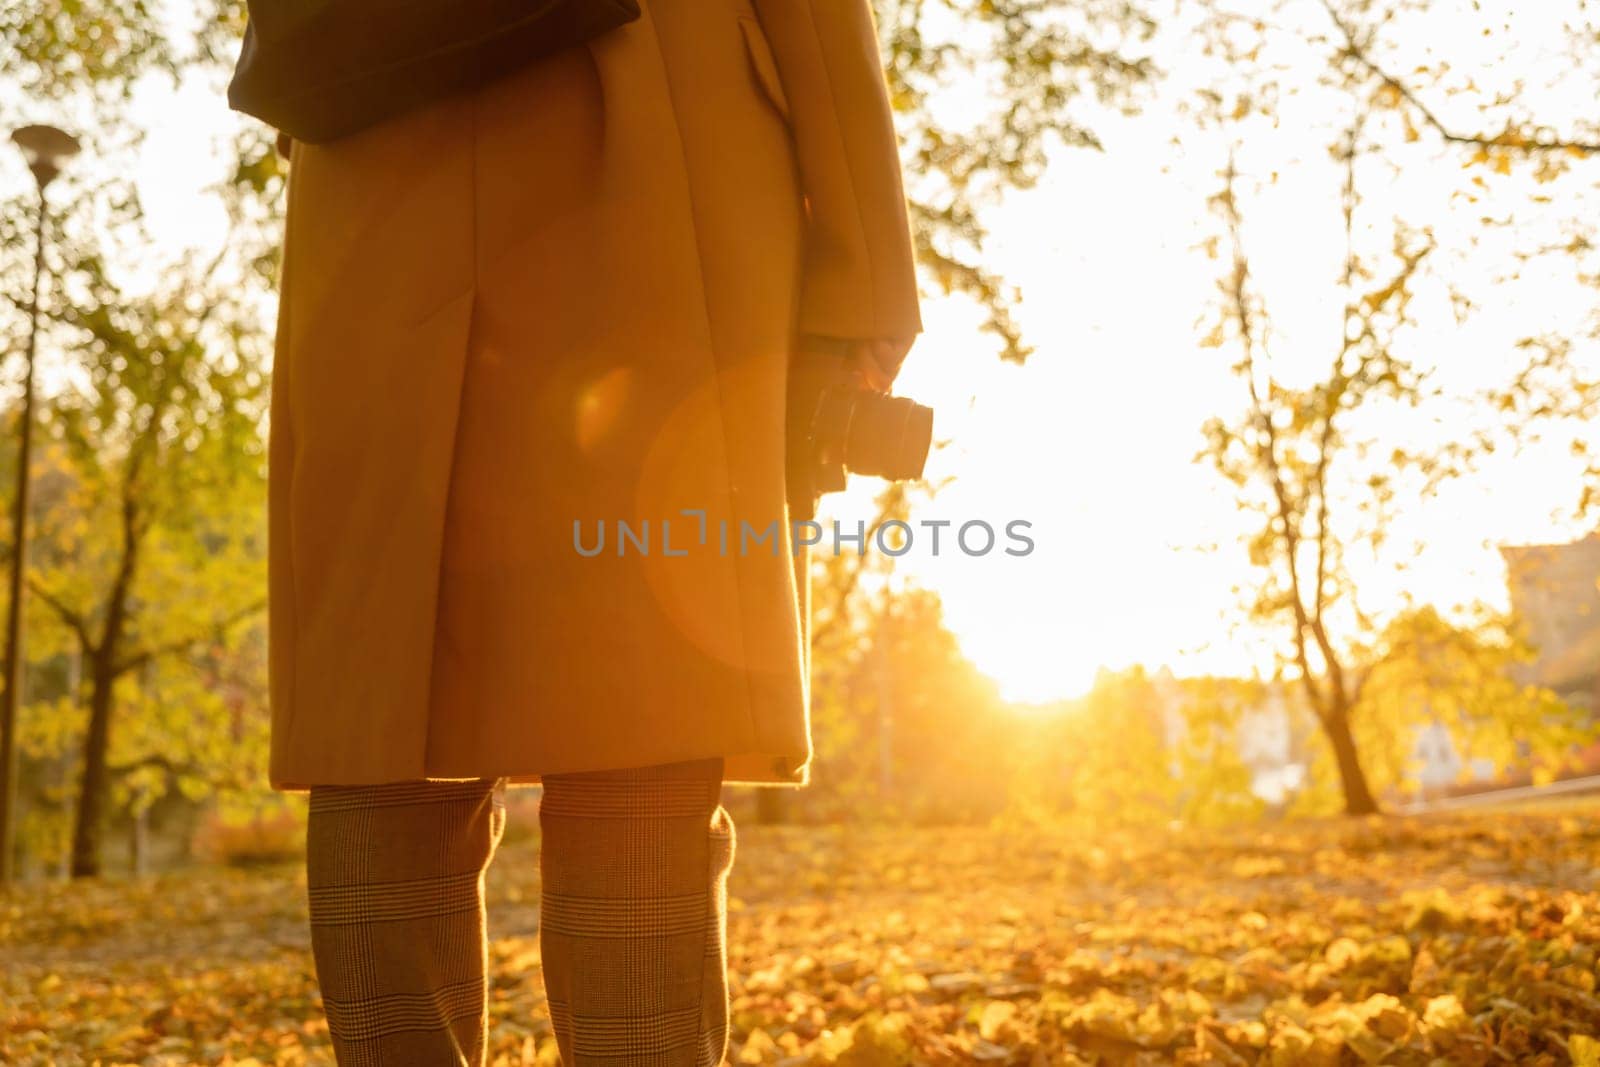 Back view of the woman holding a camera against sunlight in the autumn park